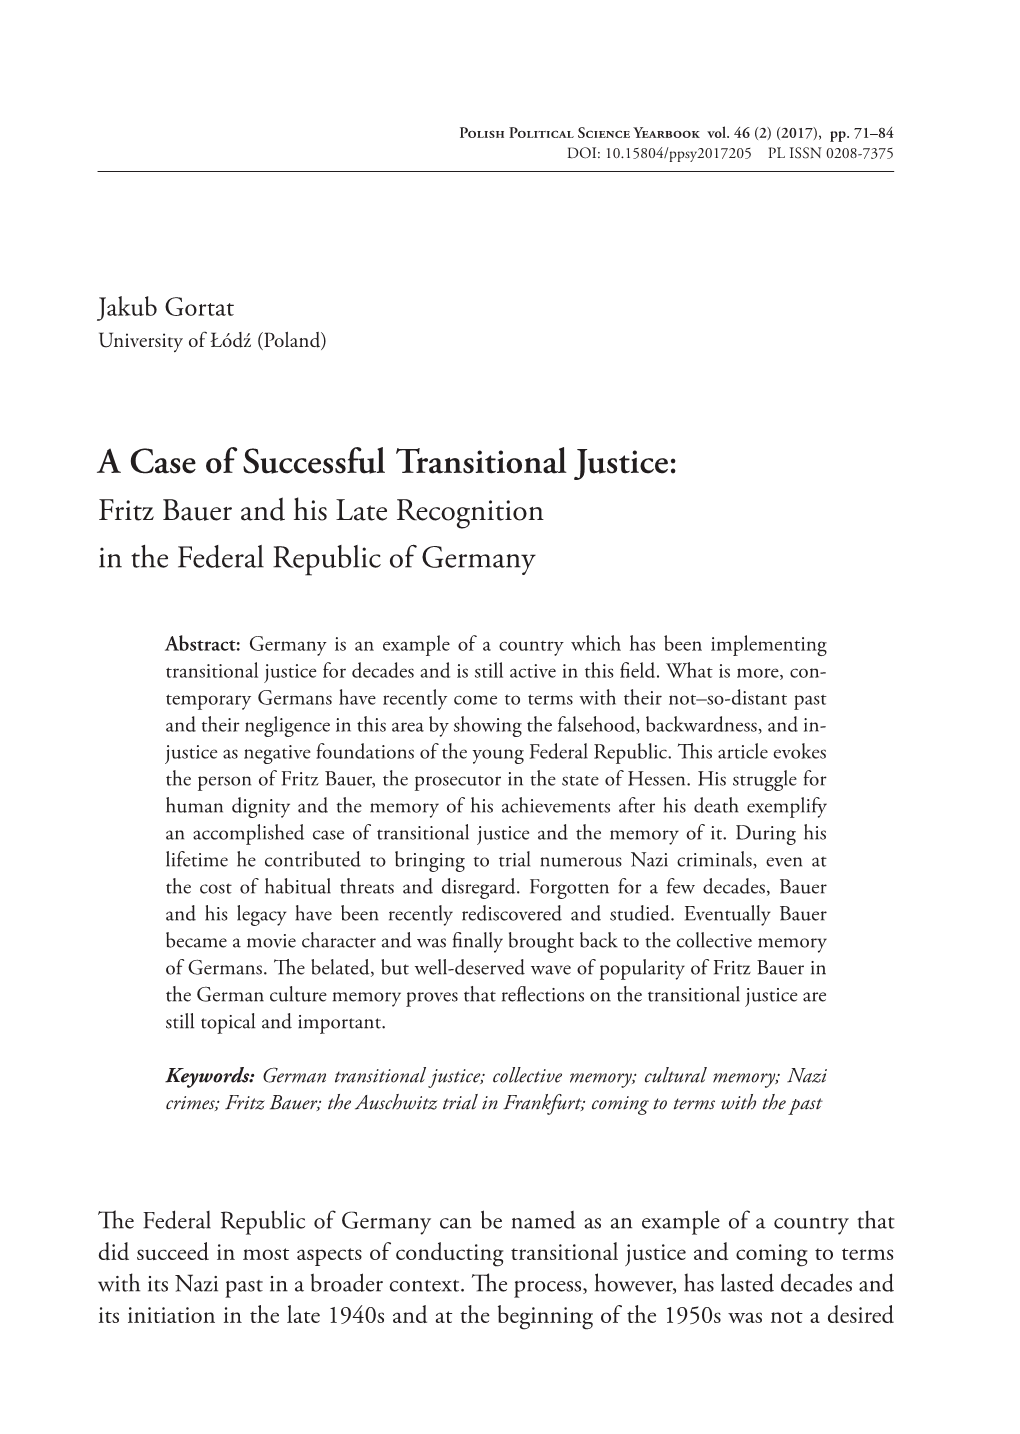 A Case of Successful Transitional Justice: Fritz Bauer and His Late Recognition in the Federal Republic of Germany